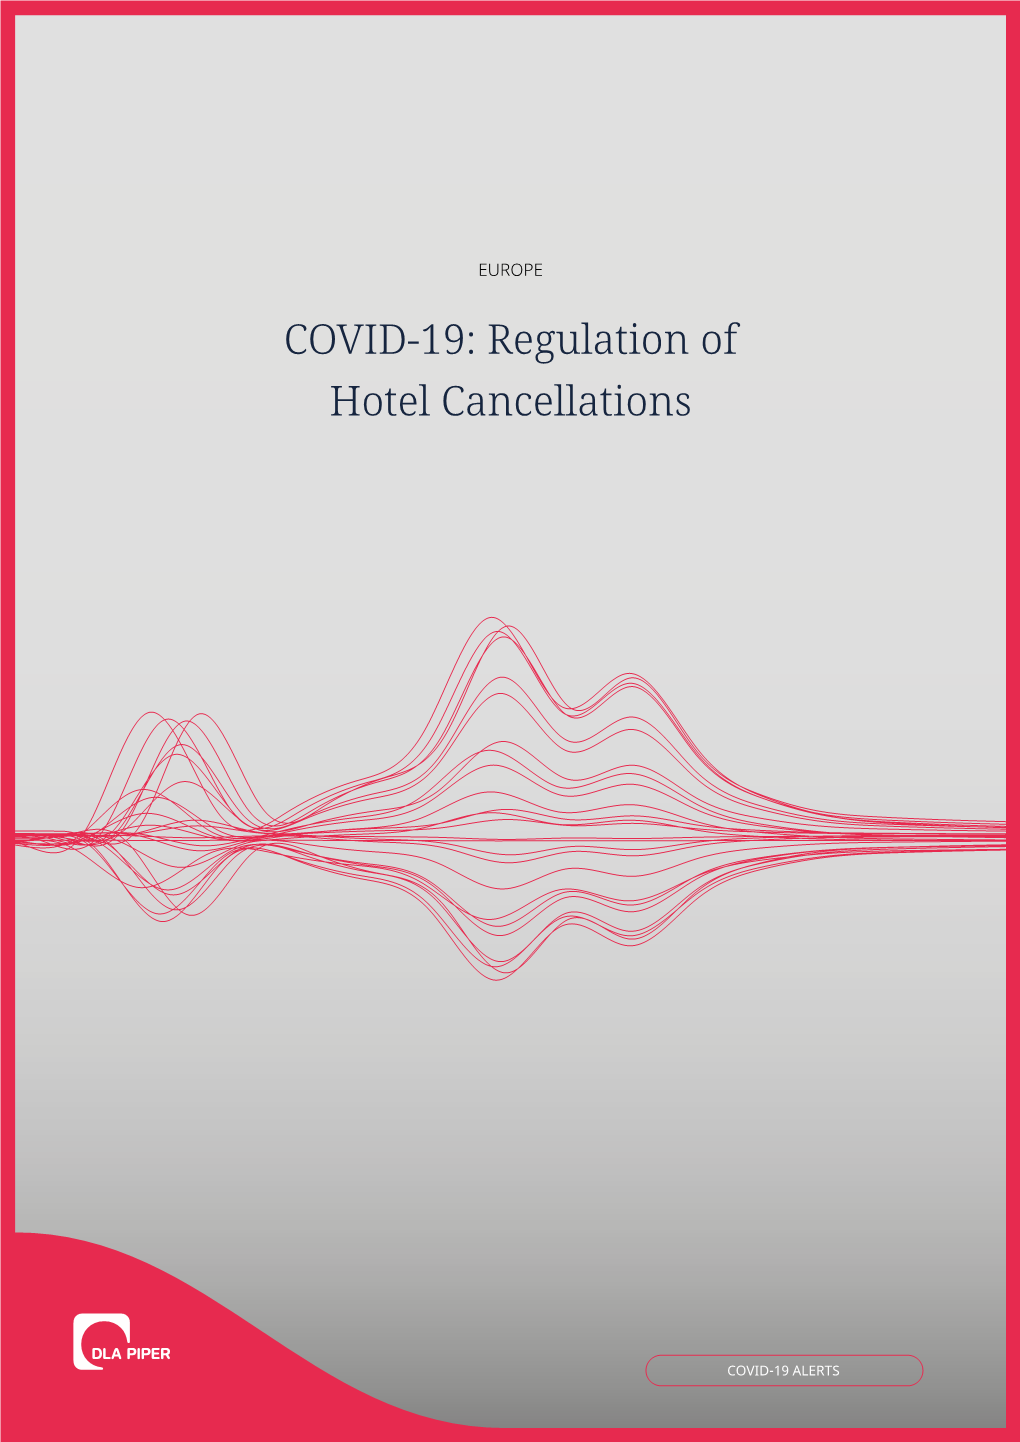 COVID-19: Regulation of Hotel Cancellations